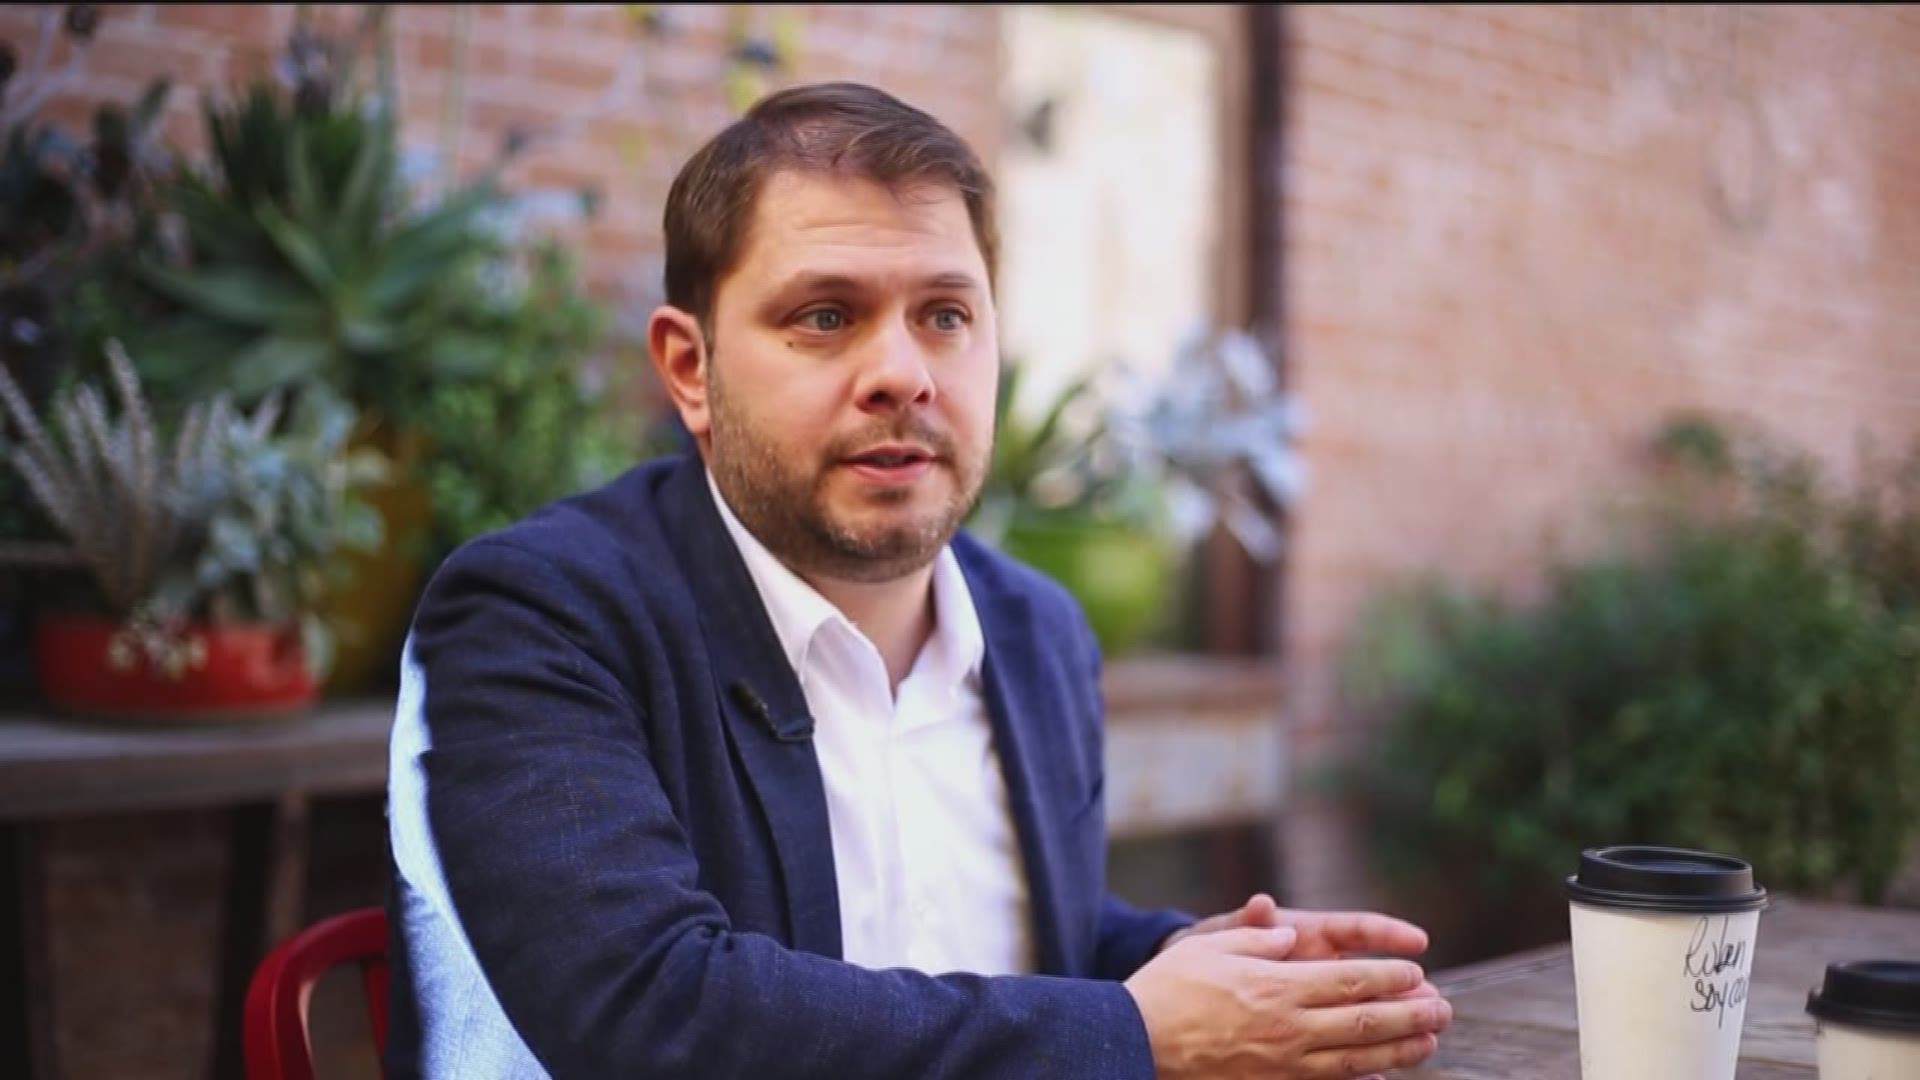 Democratic Congressman Ruben Gallego says President Trump's attacking a 'delusional' problem with American troops and Nancy Pelosi faces a win-or-else mid-term election.